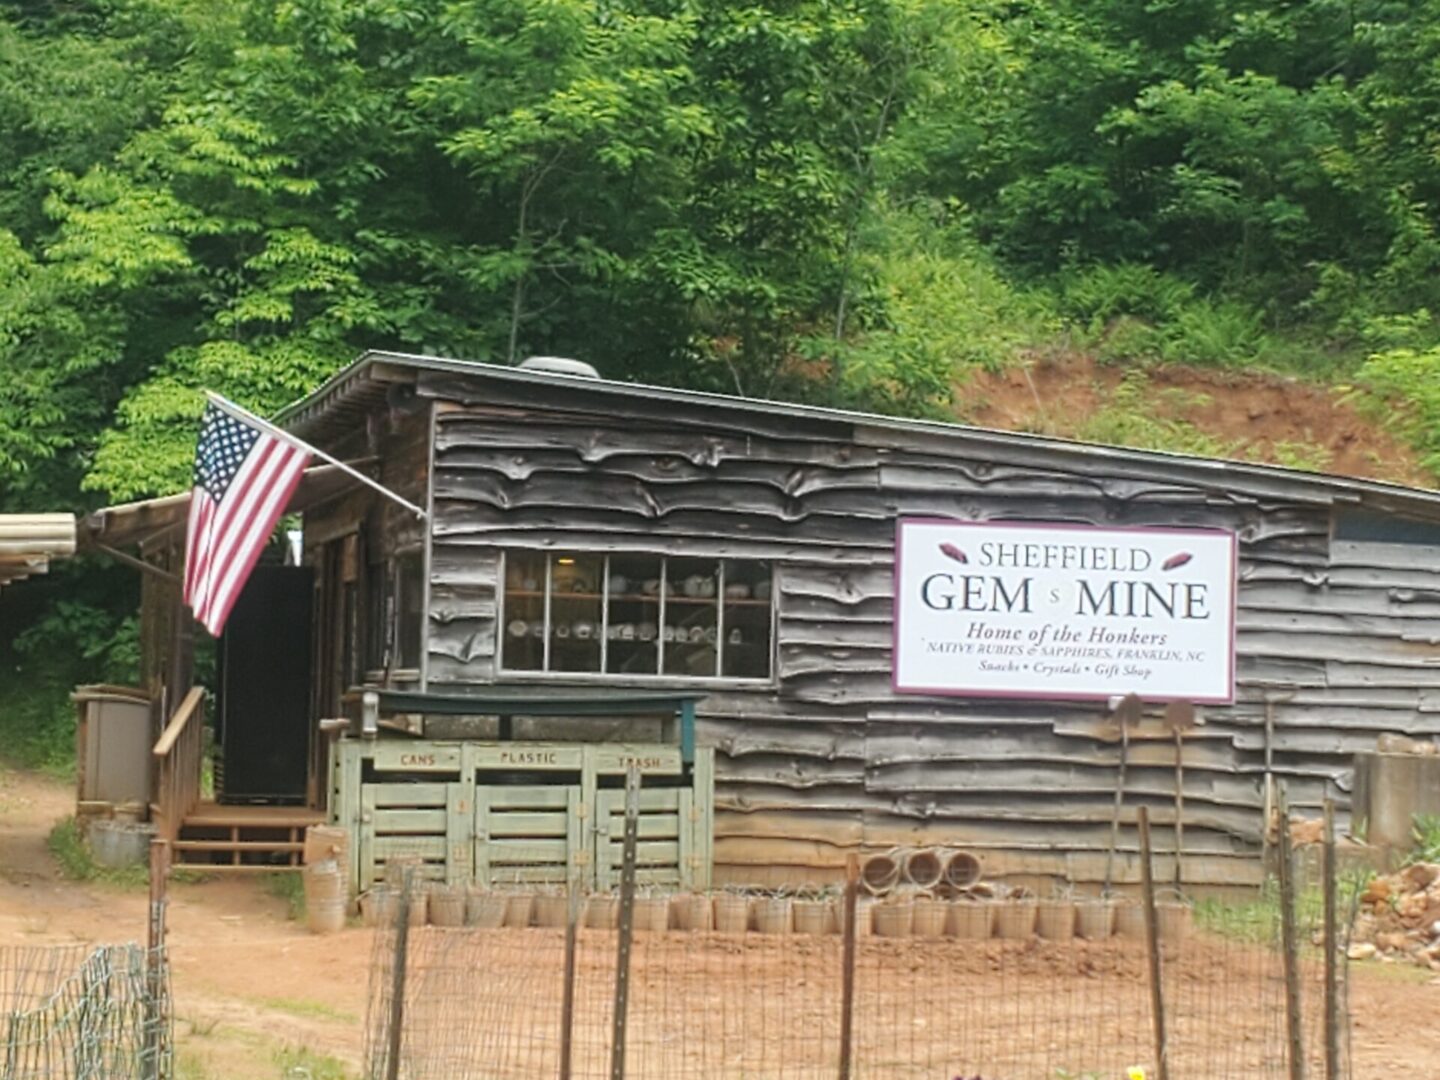 A log cabin with an american flag on the front.